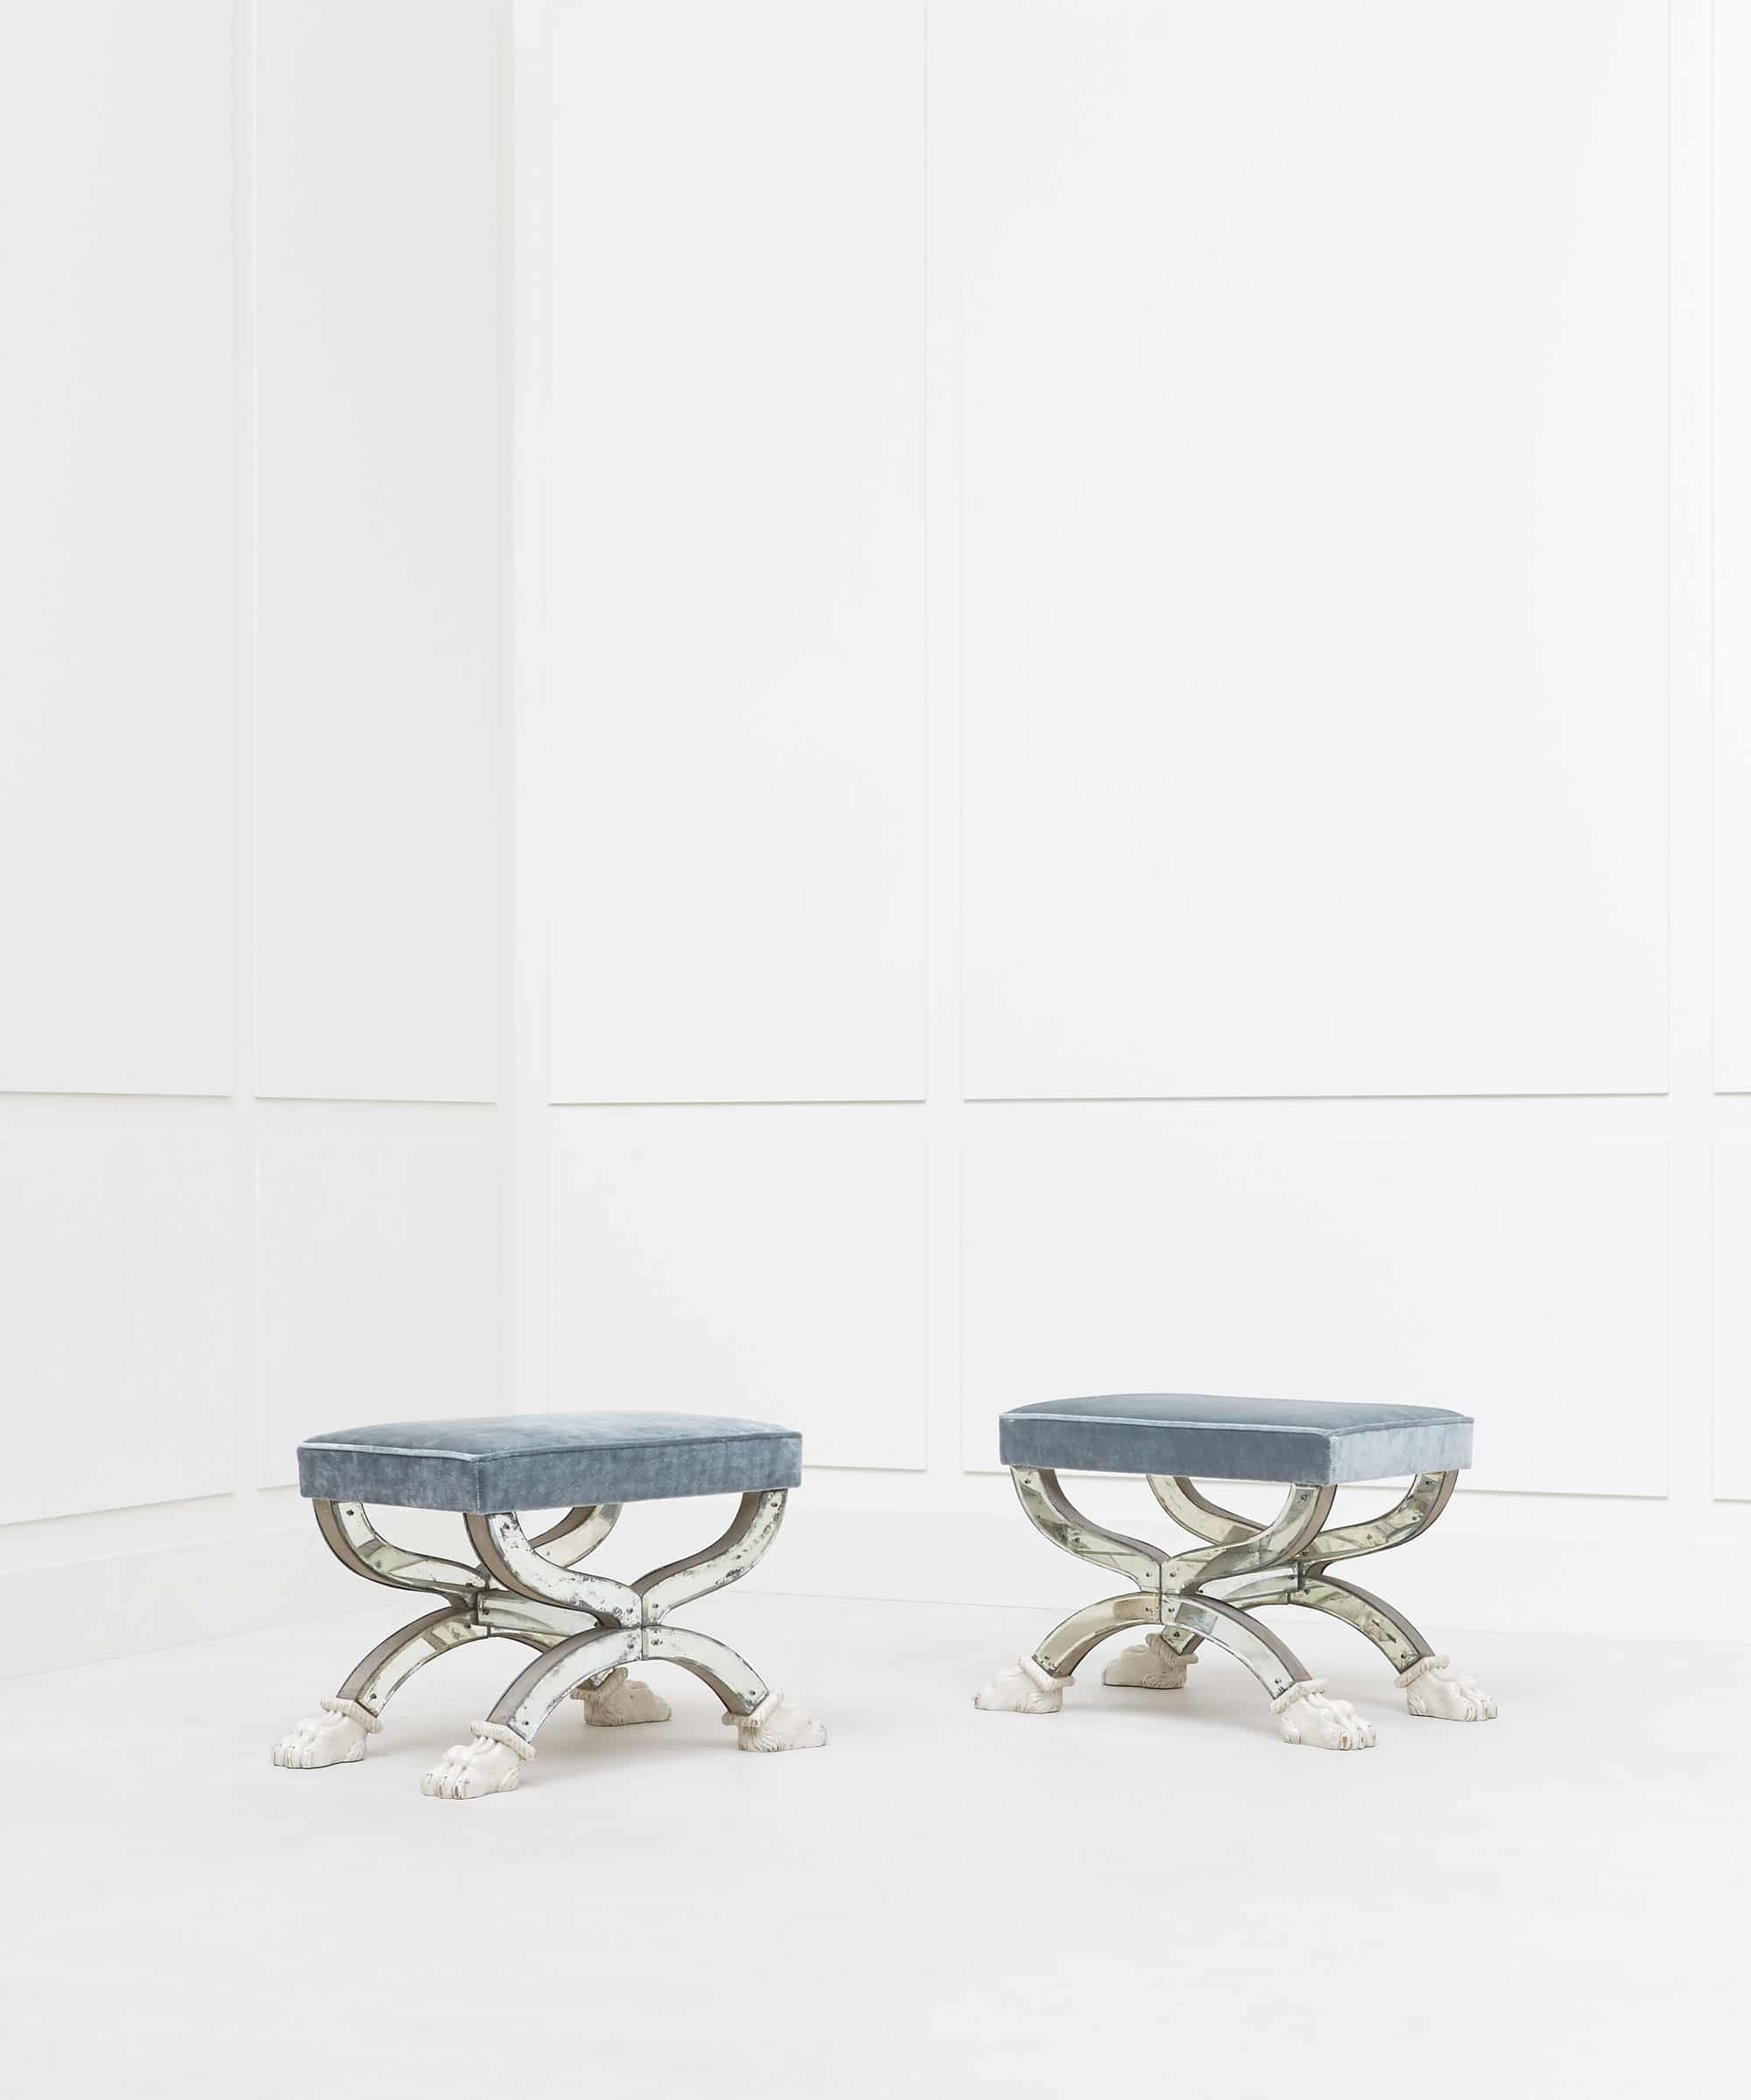 Serge Roche, Pair of stools, vue 02